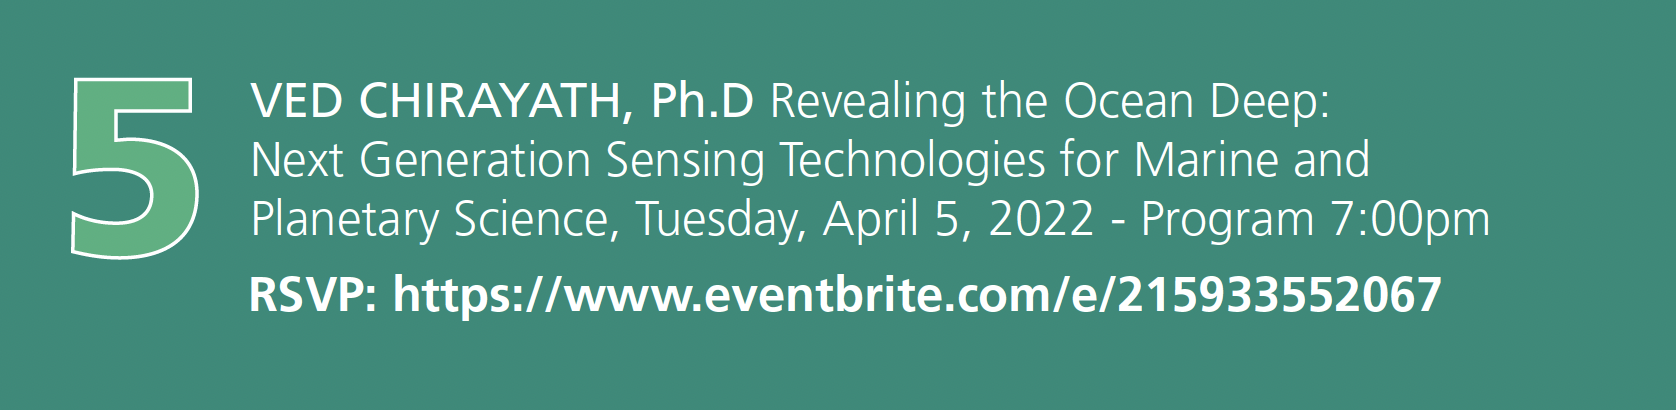 Number 5. Ved Chirayath, Ph.D. Revealing the Ocean Deep: Next Generations Sensing Technologies for Marine and Planetary Science. Tuesday, April 5, 2022. Program 7:00pm RSVP: event registration link embedded in image